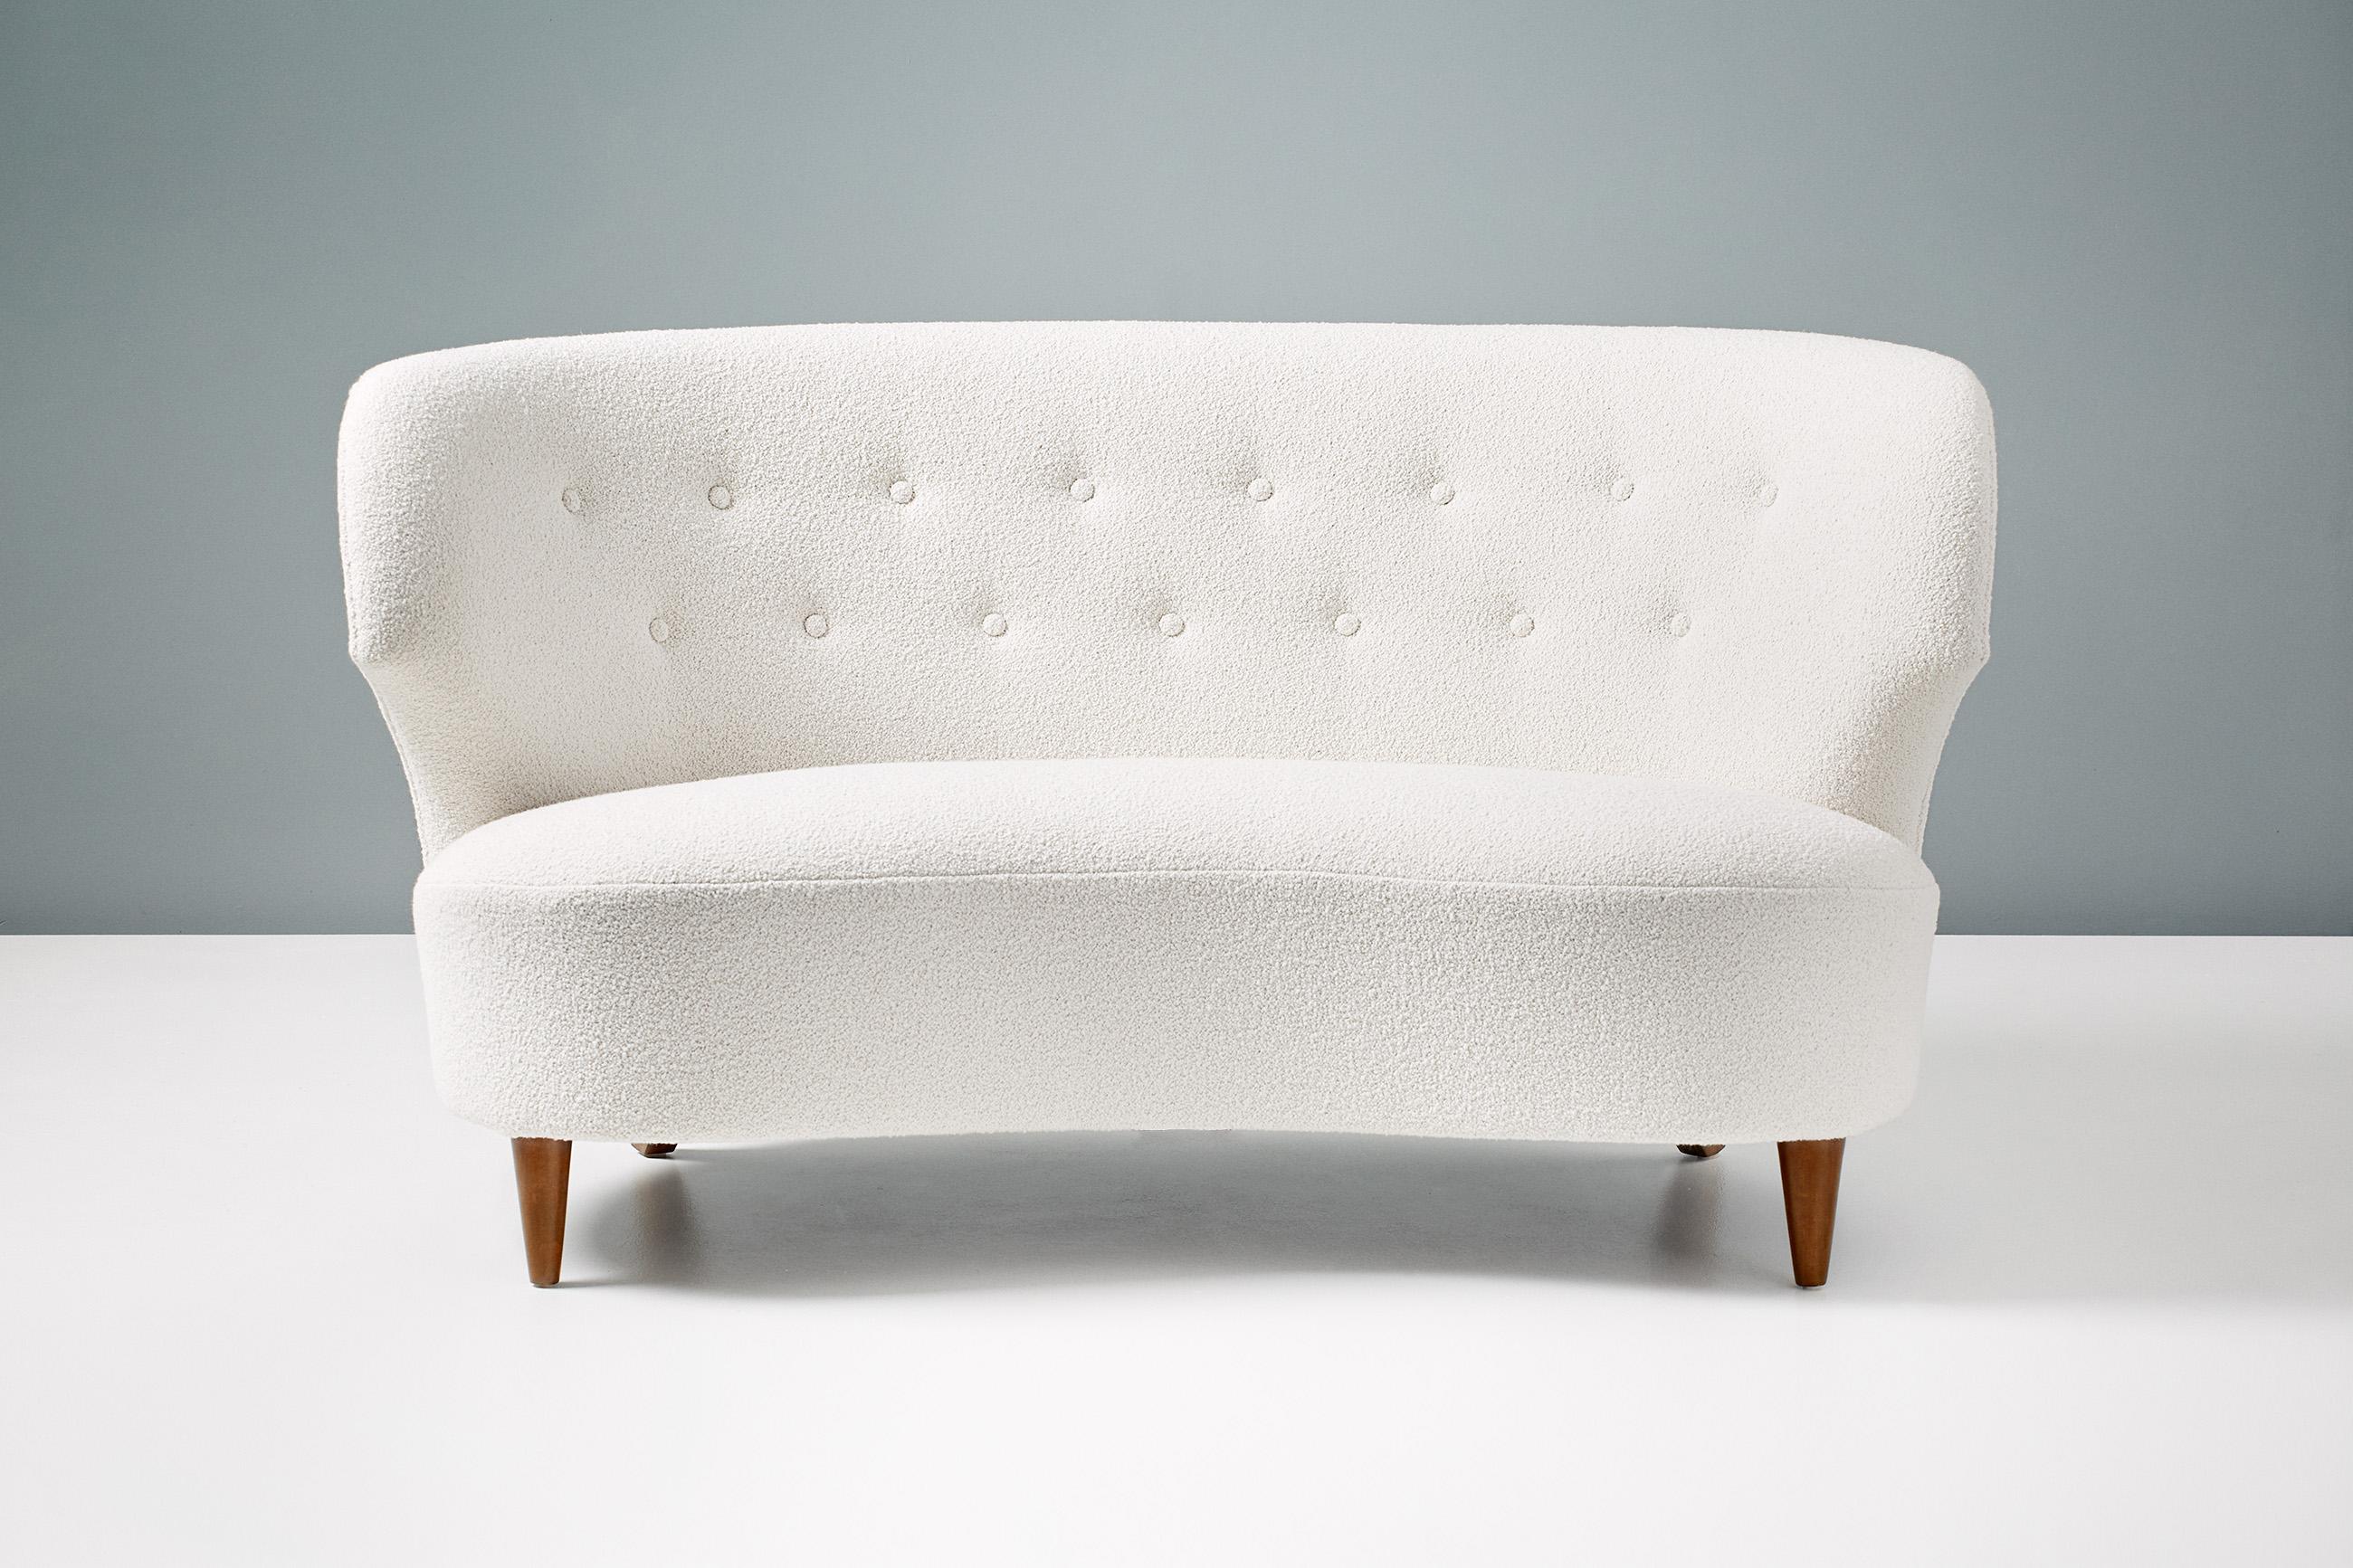 Carl-Johan Boman

Curved love seat sofa, circa 1940

This 2-person sofa was produced in Finland by Oy Boman AB in the 1940s. It has been refurbished and reupholstered at our London workshops and finished in off-white cotton-wool blend boucle